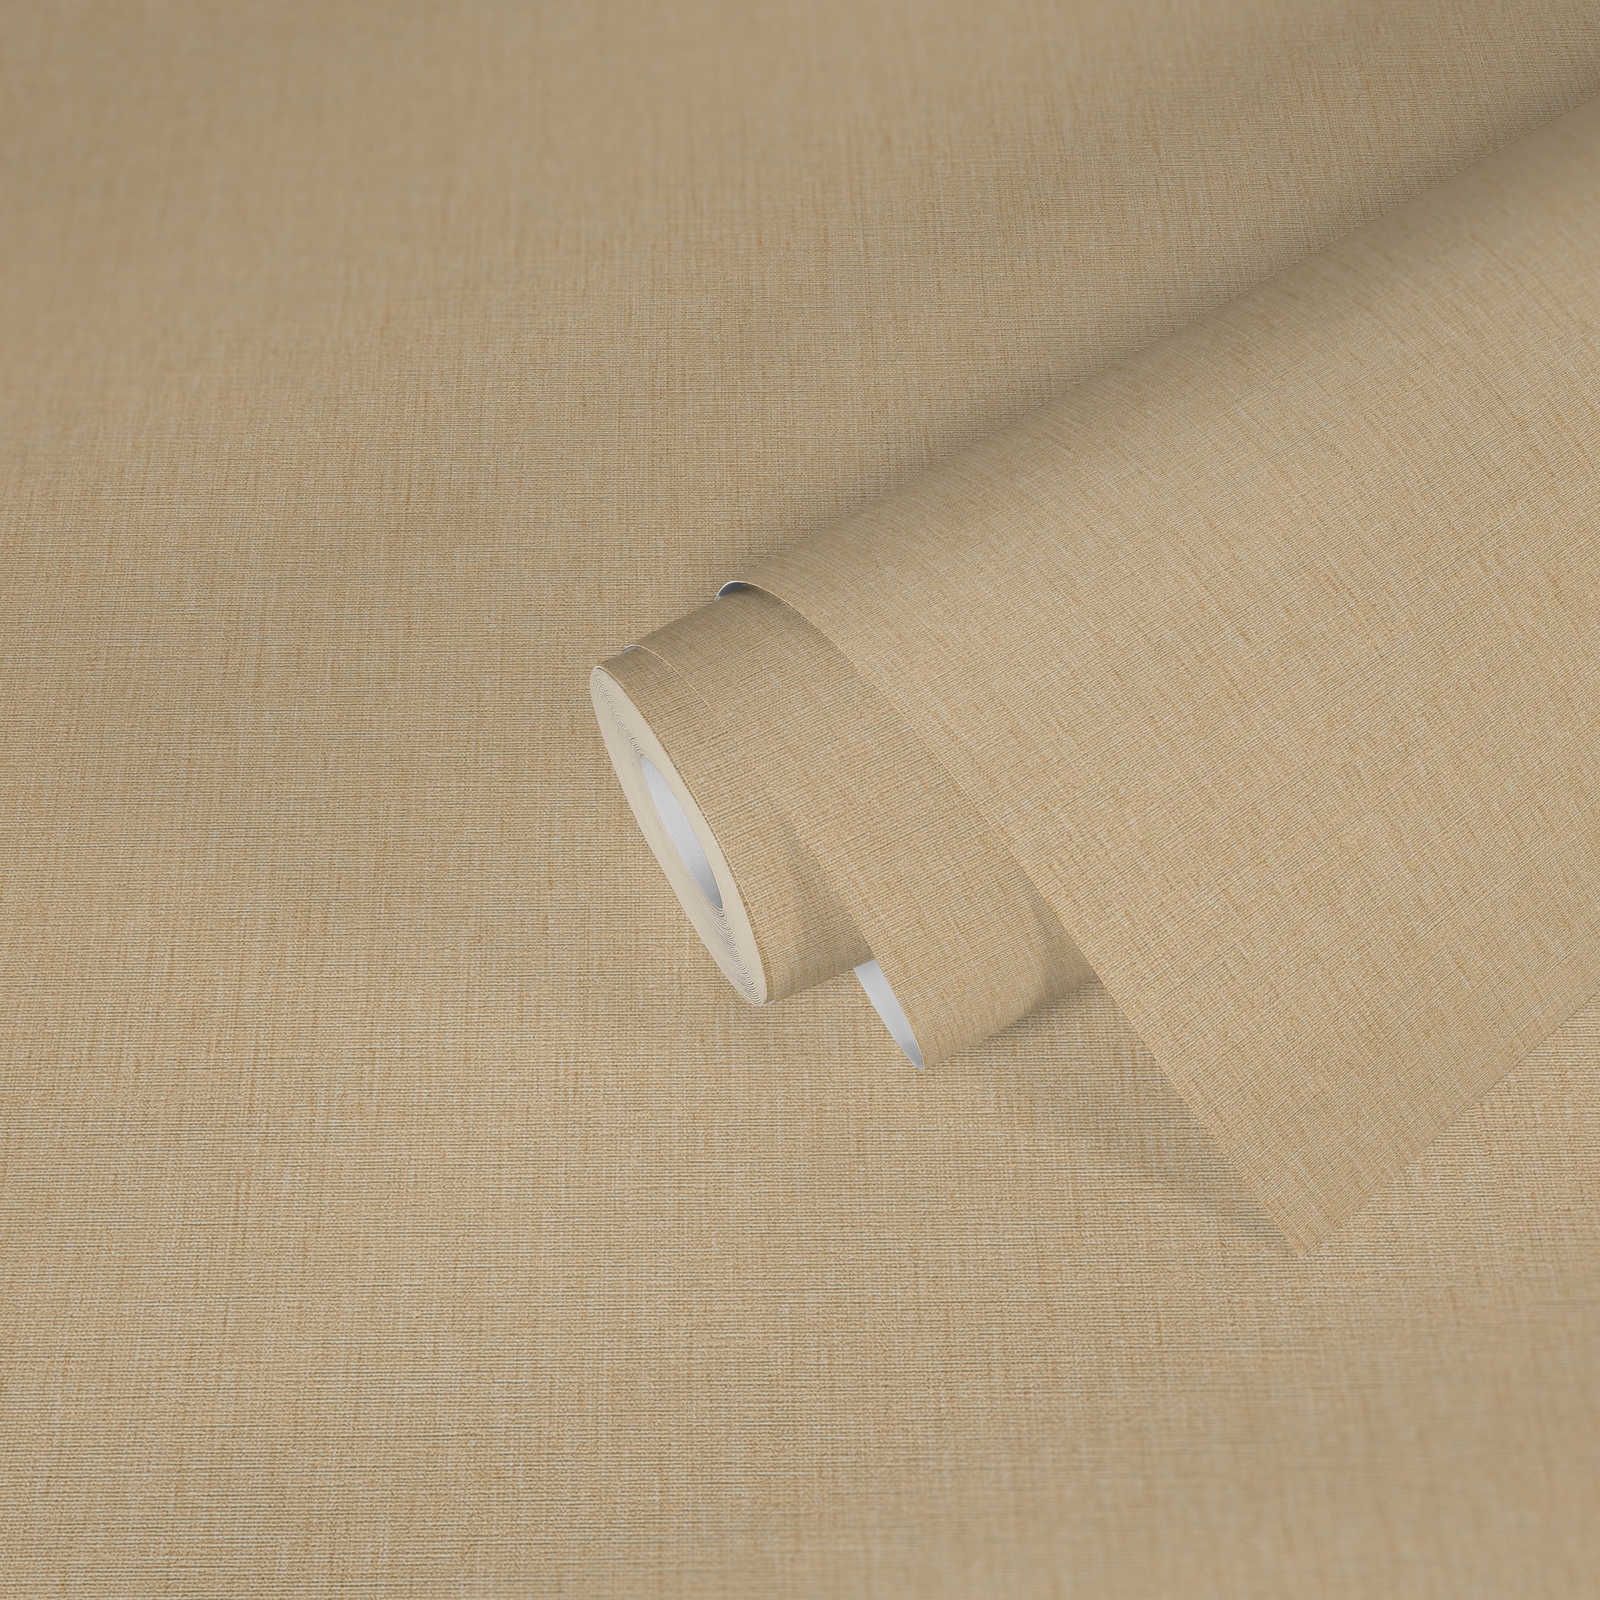             Non-woven wallpaper with a light textile look in a simple colour tone - Beige
        